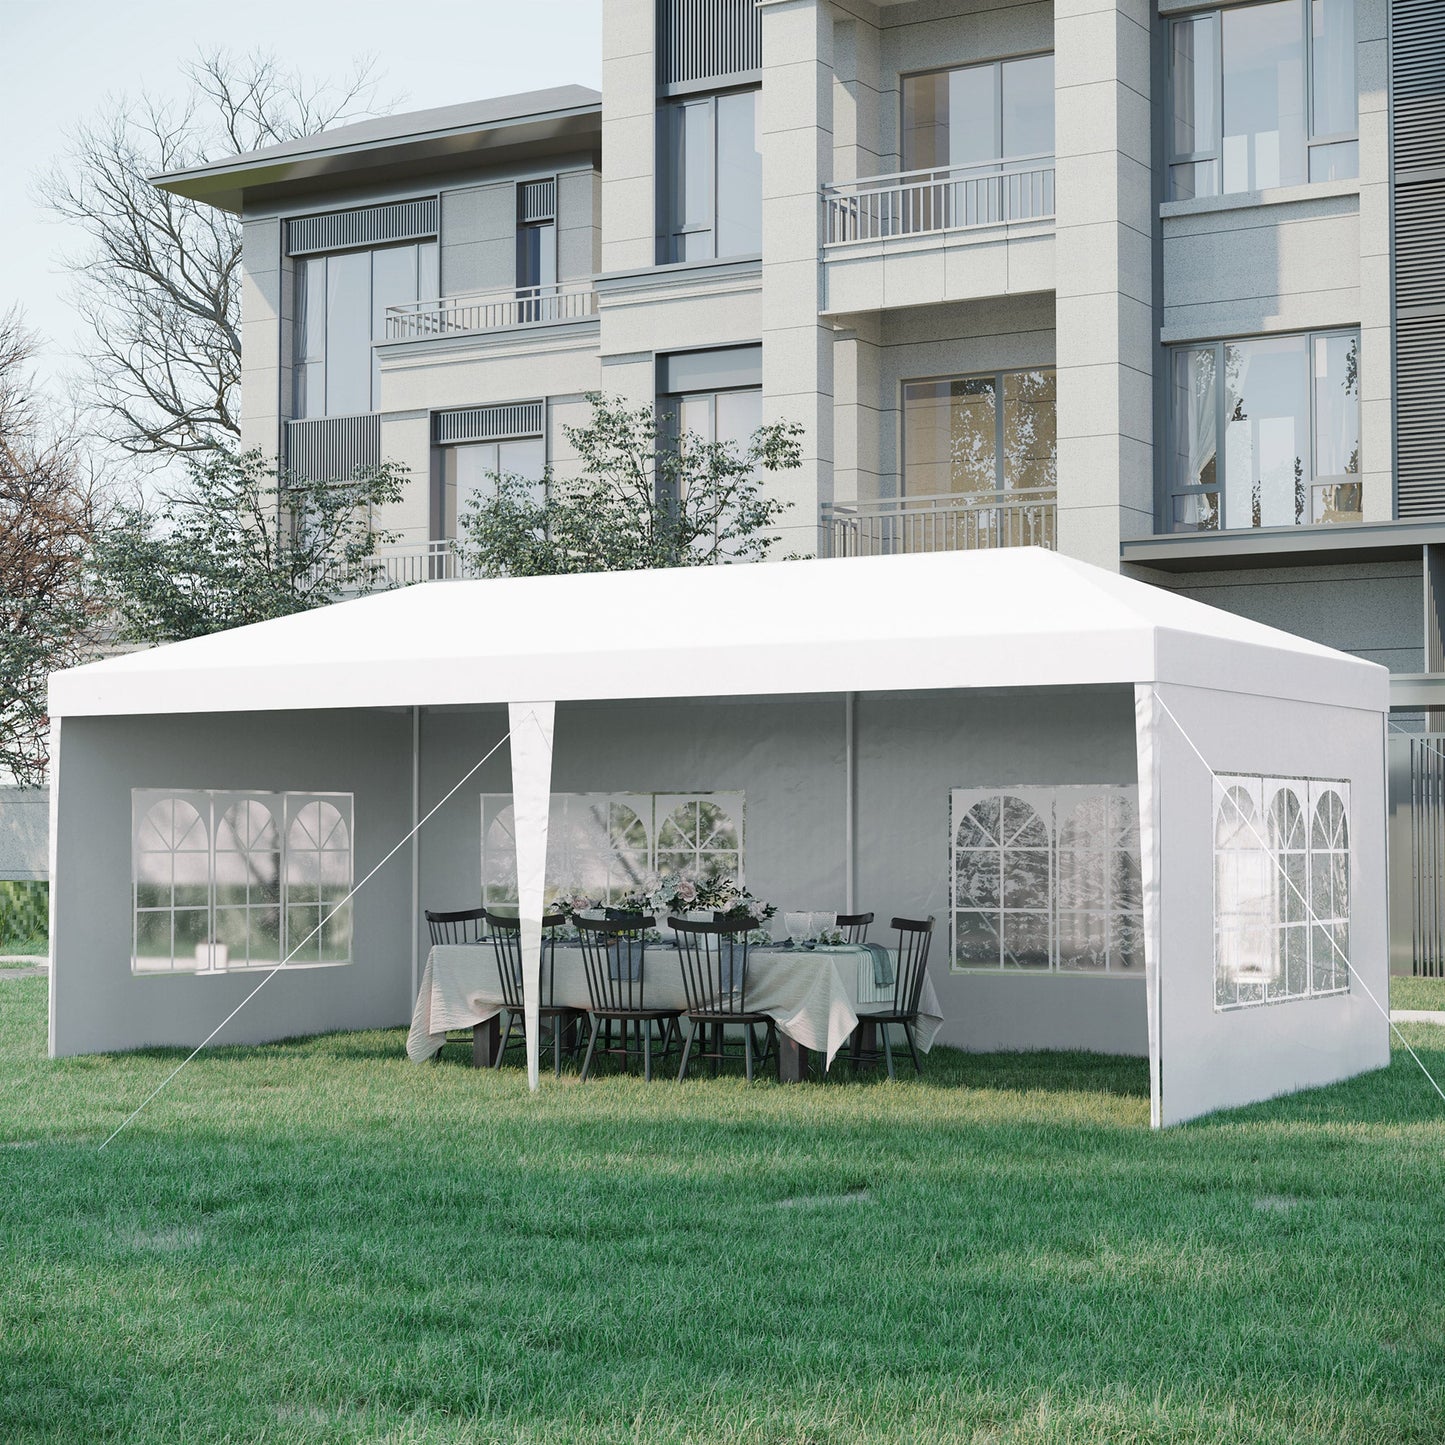 18.7' x 9.4' Party Tent, Portable Folding Wedding Tent, Garden Canopy Event Shelter, Outdoor Sunshade with 4 Removable Sidewalls, White at Gallery Canada